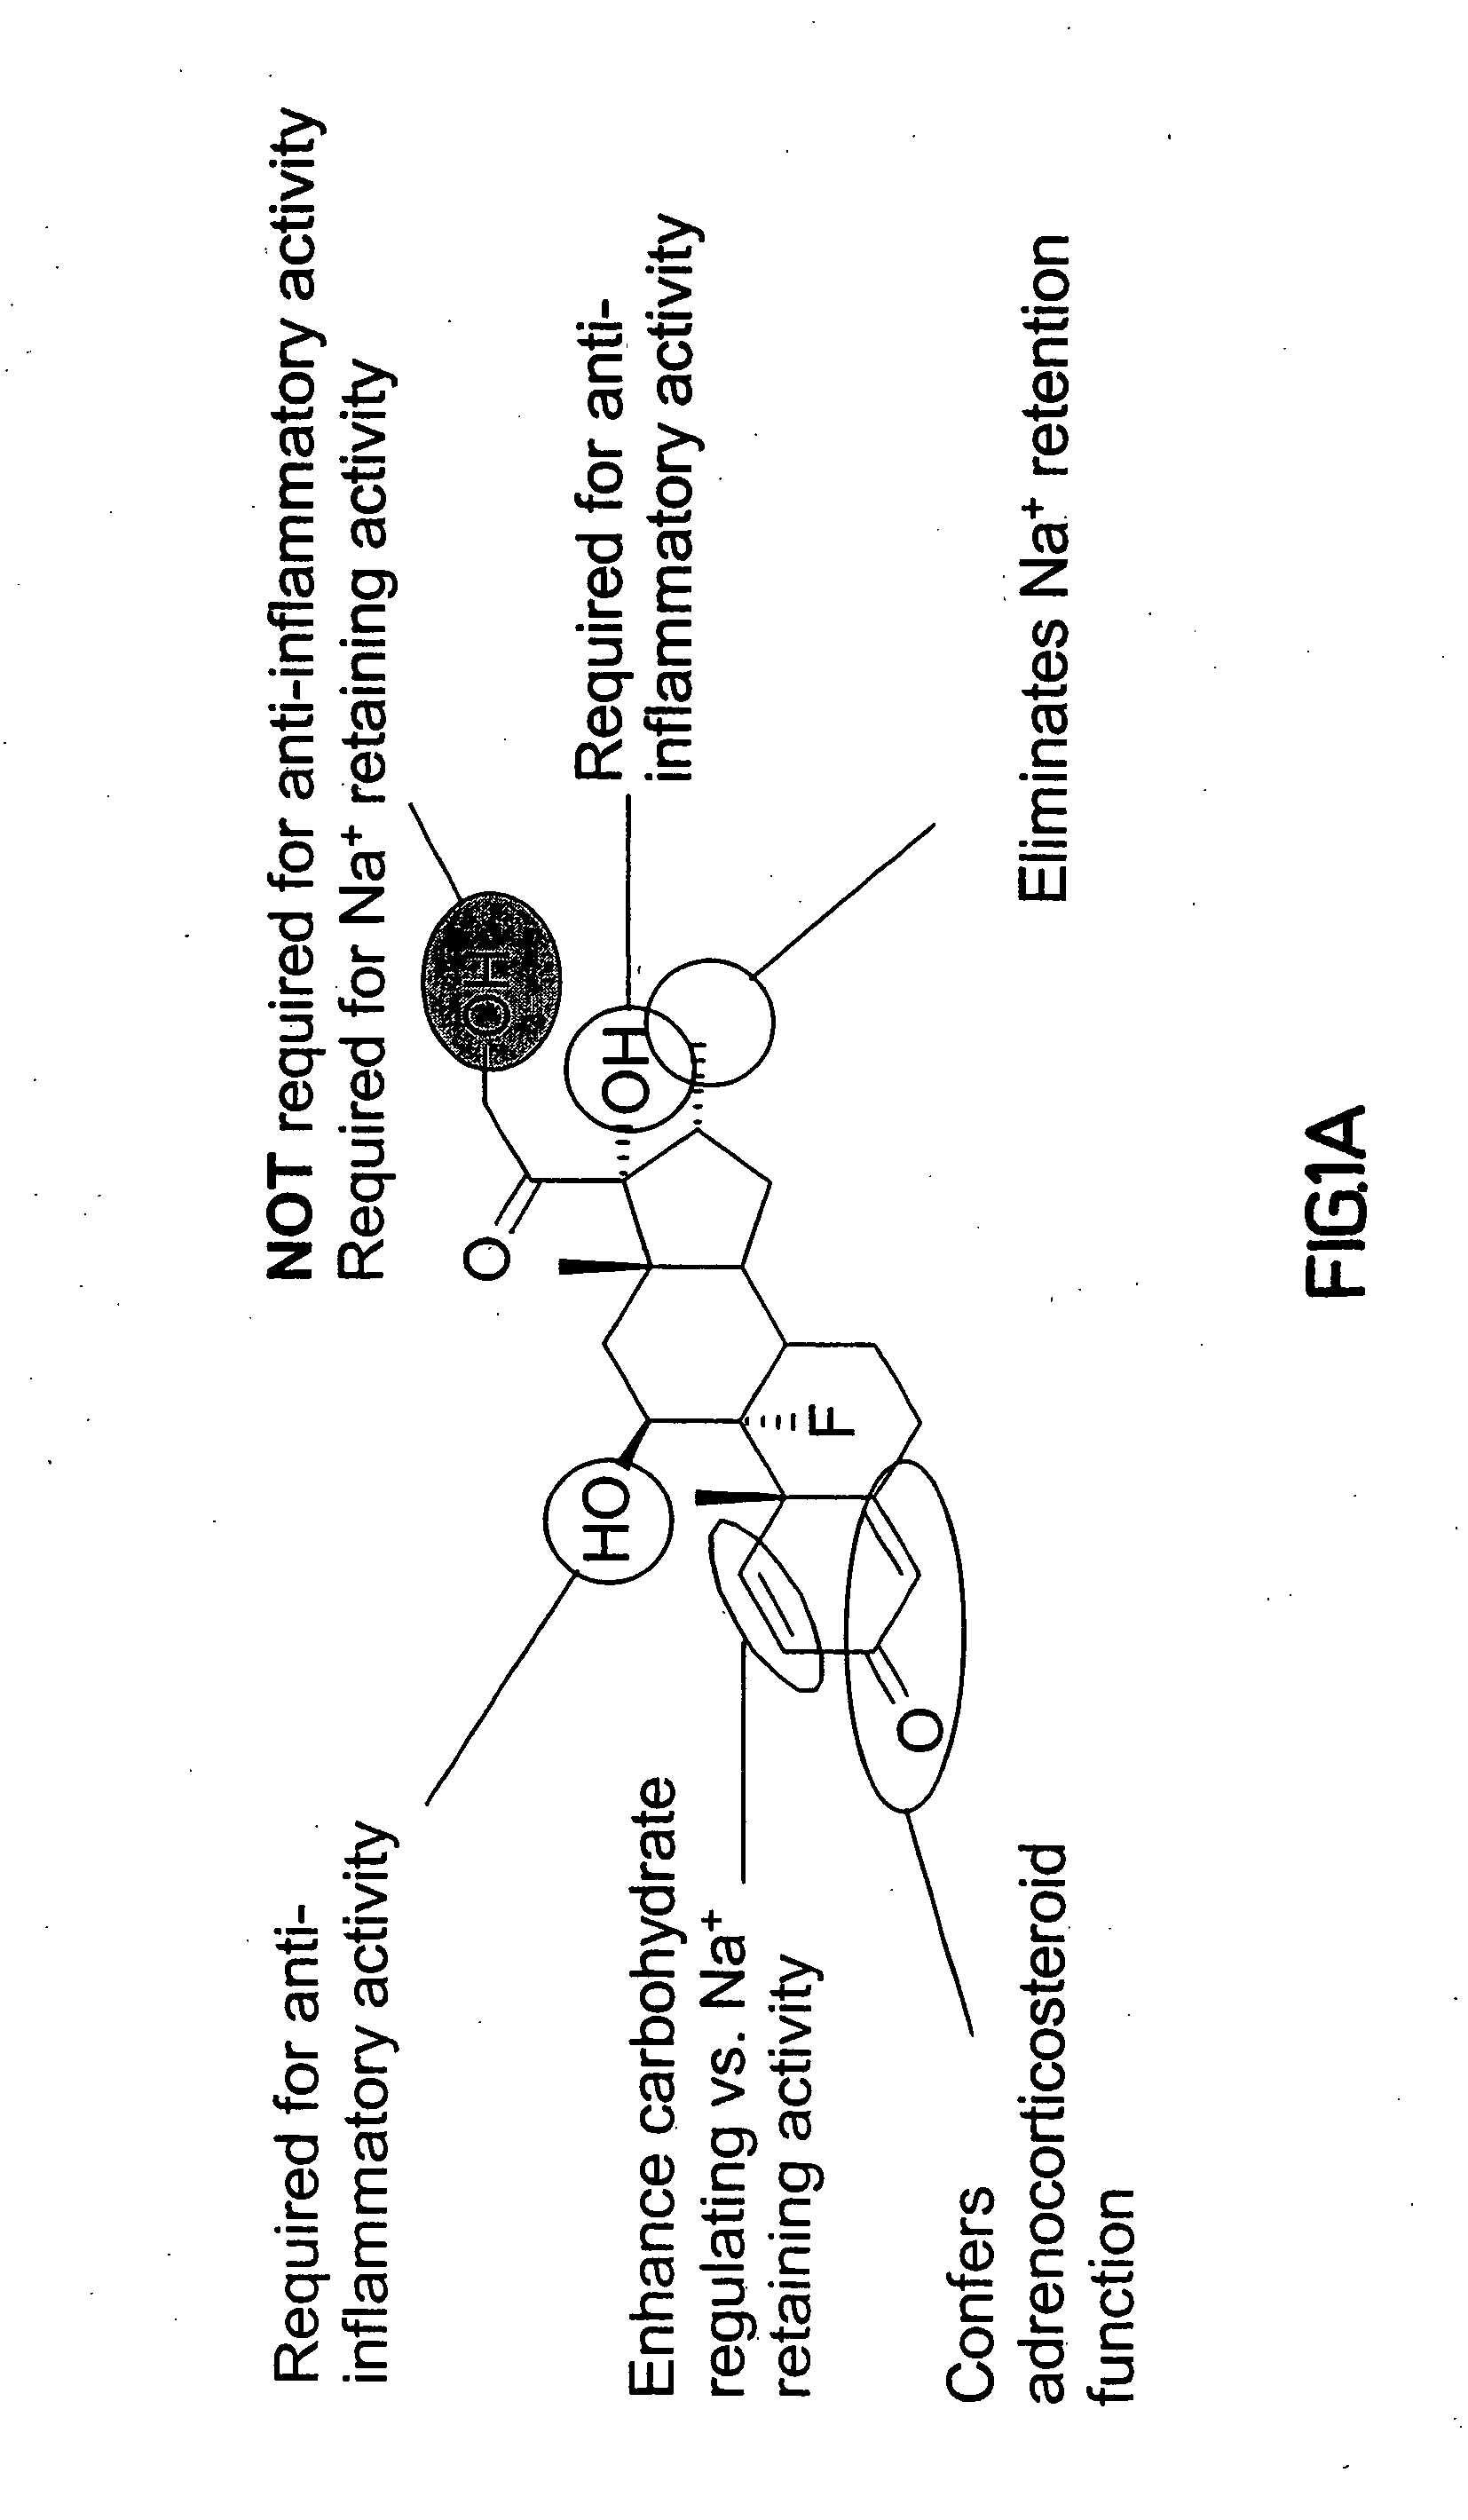 Synthesis and use of reagents for improved DNA lipofection and/or slow release prodrug and drug therapies